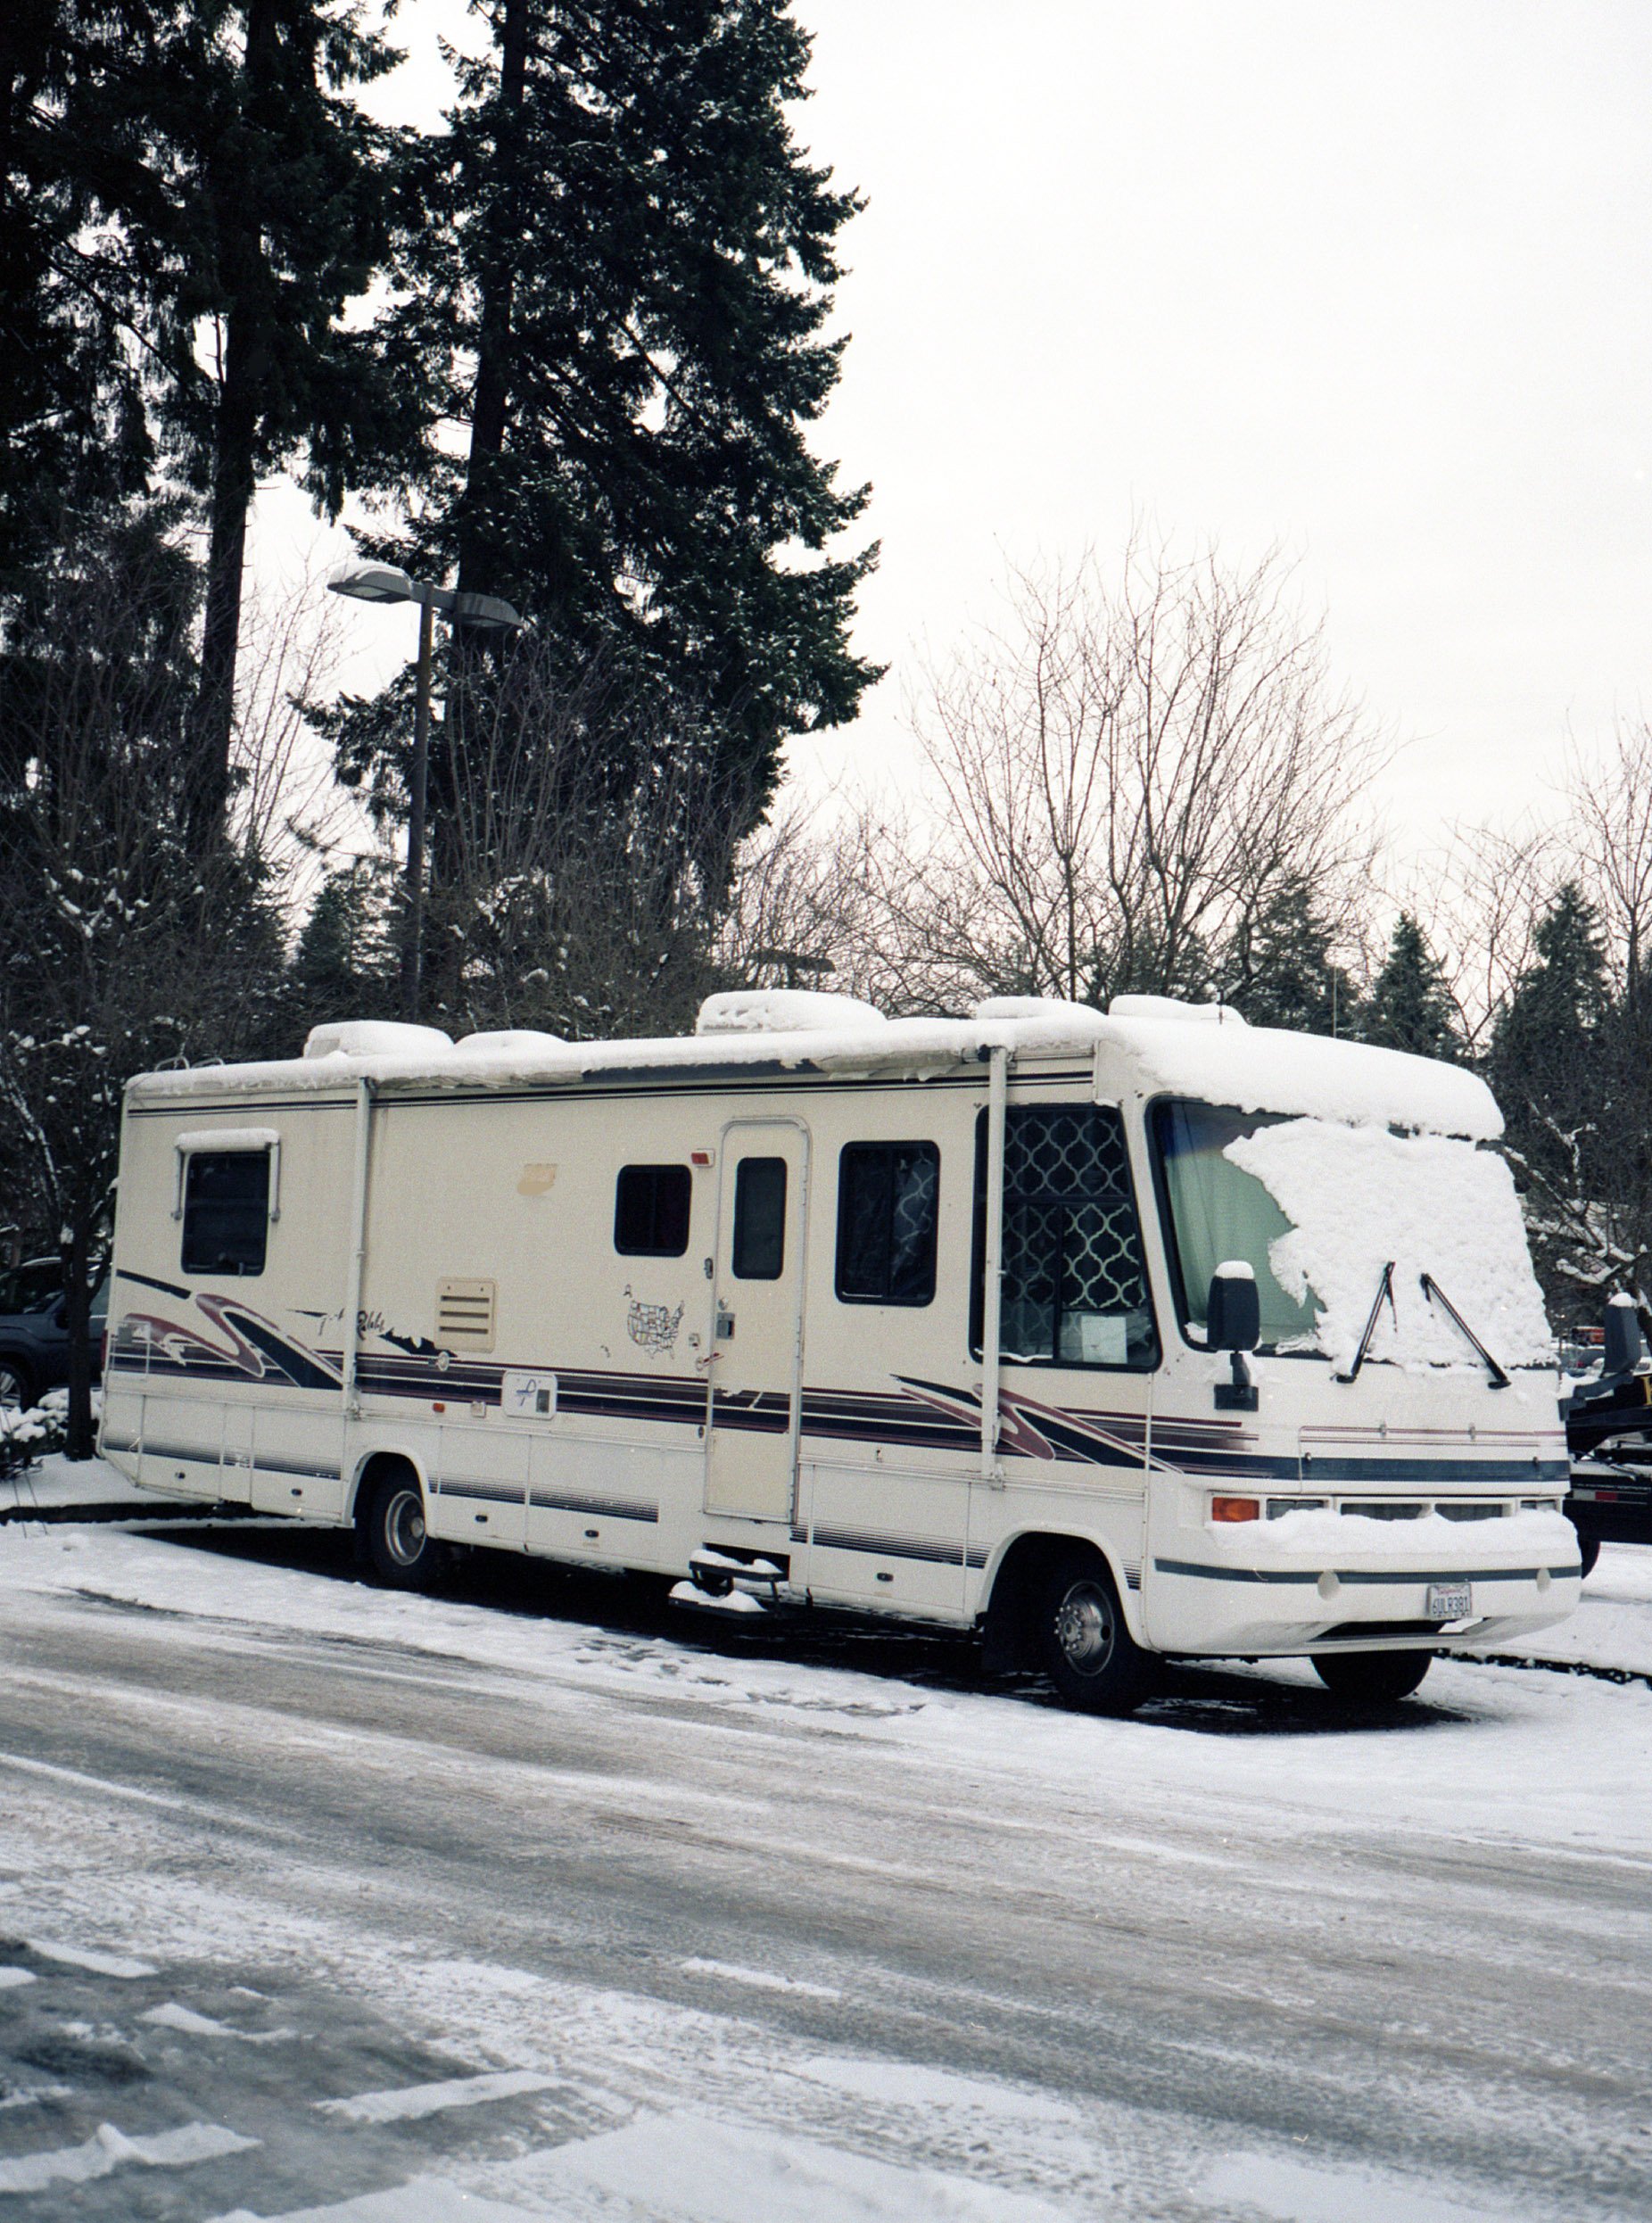  Motorhome under the snow inSeattle - USA 